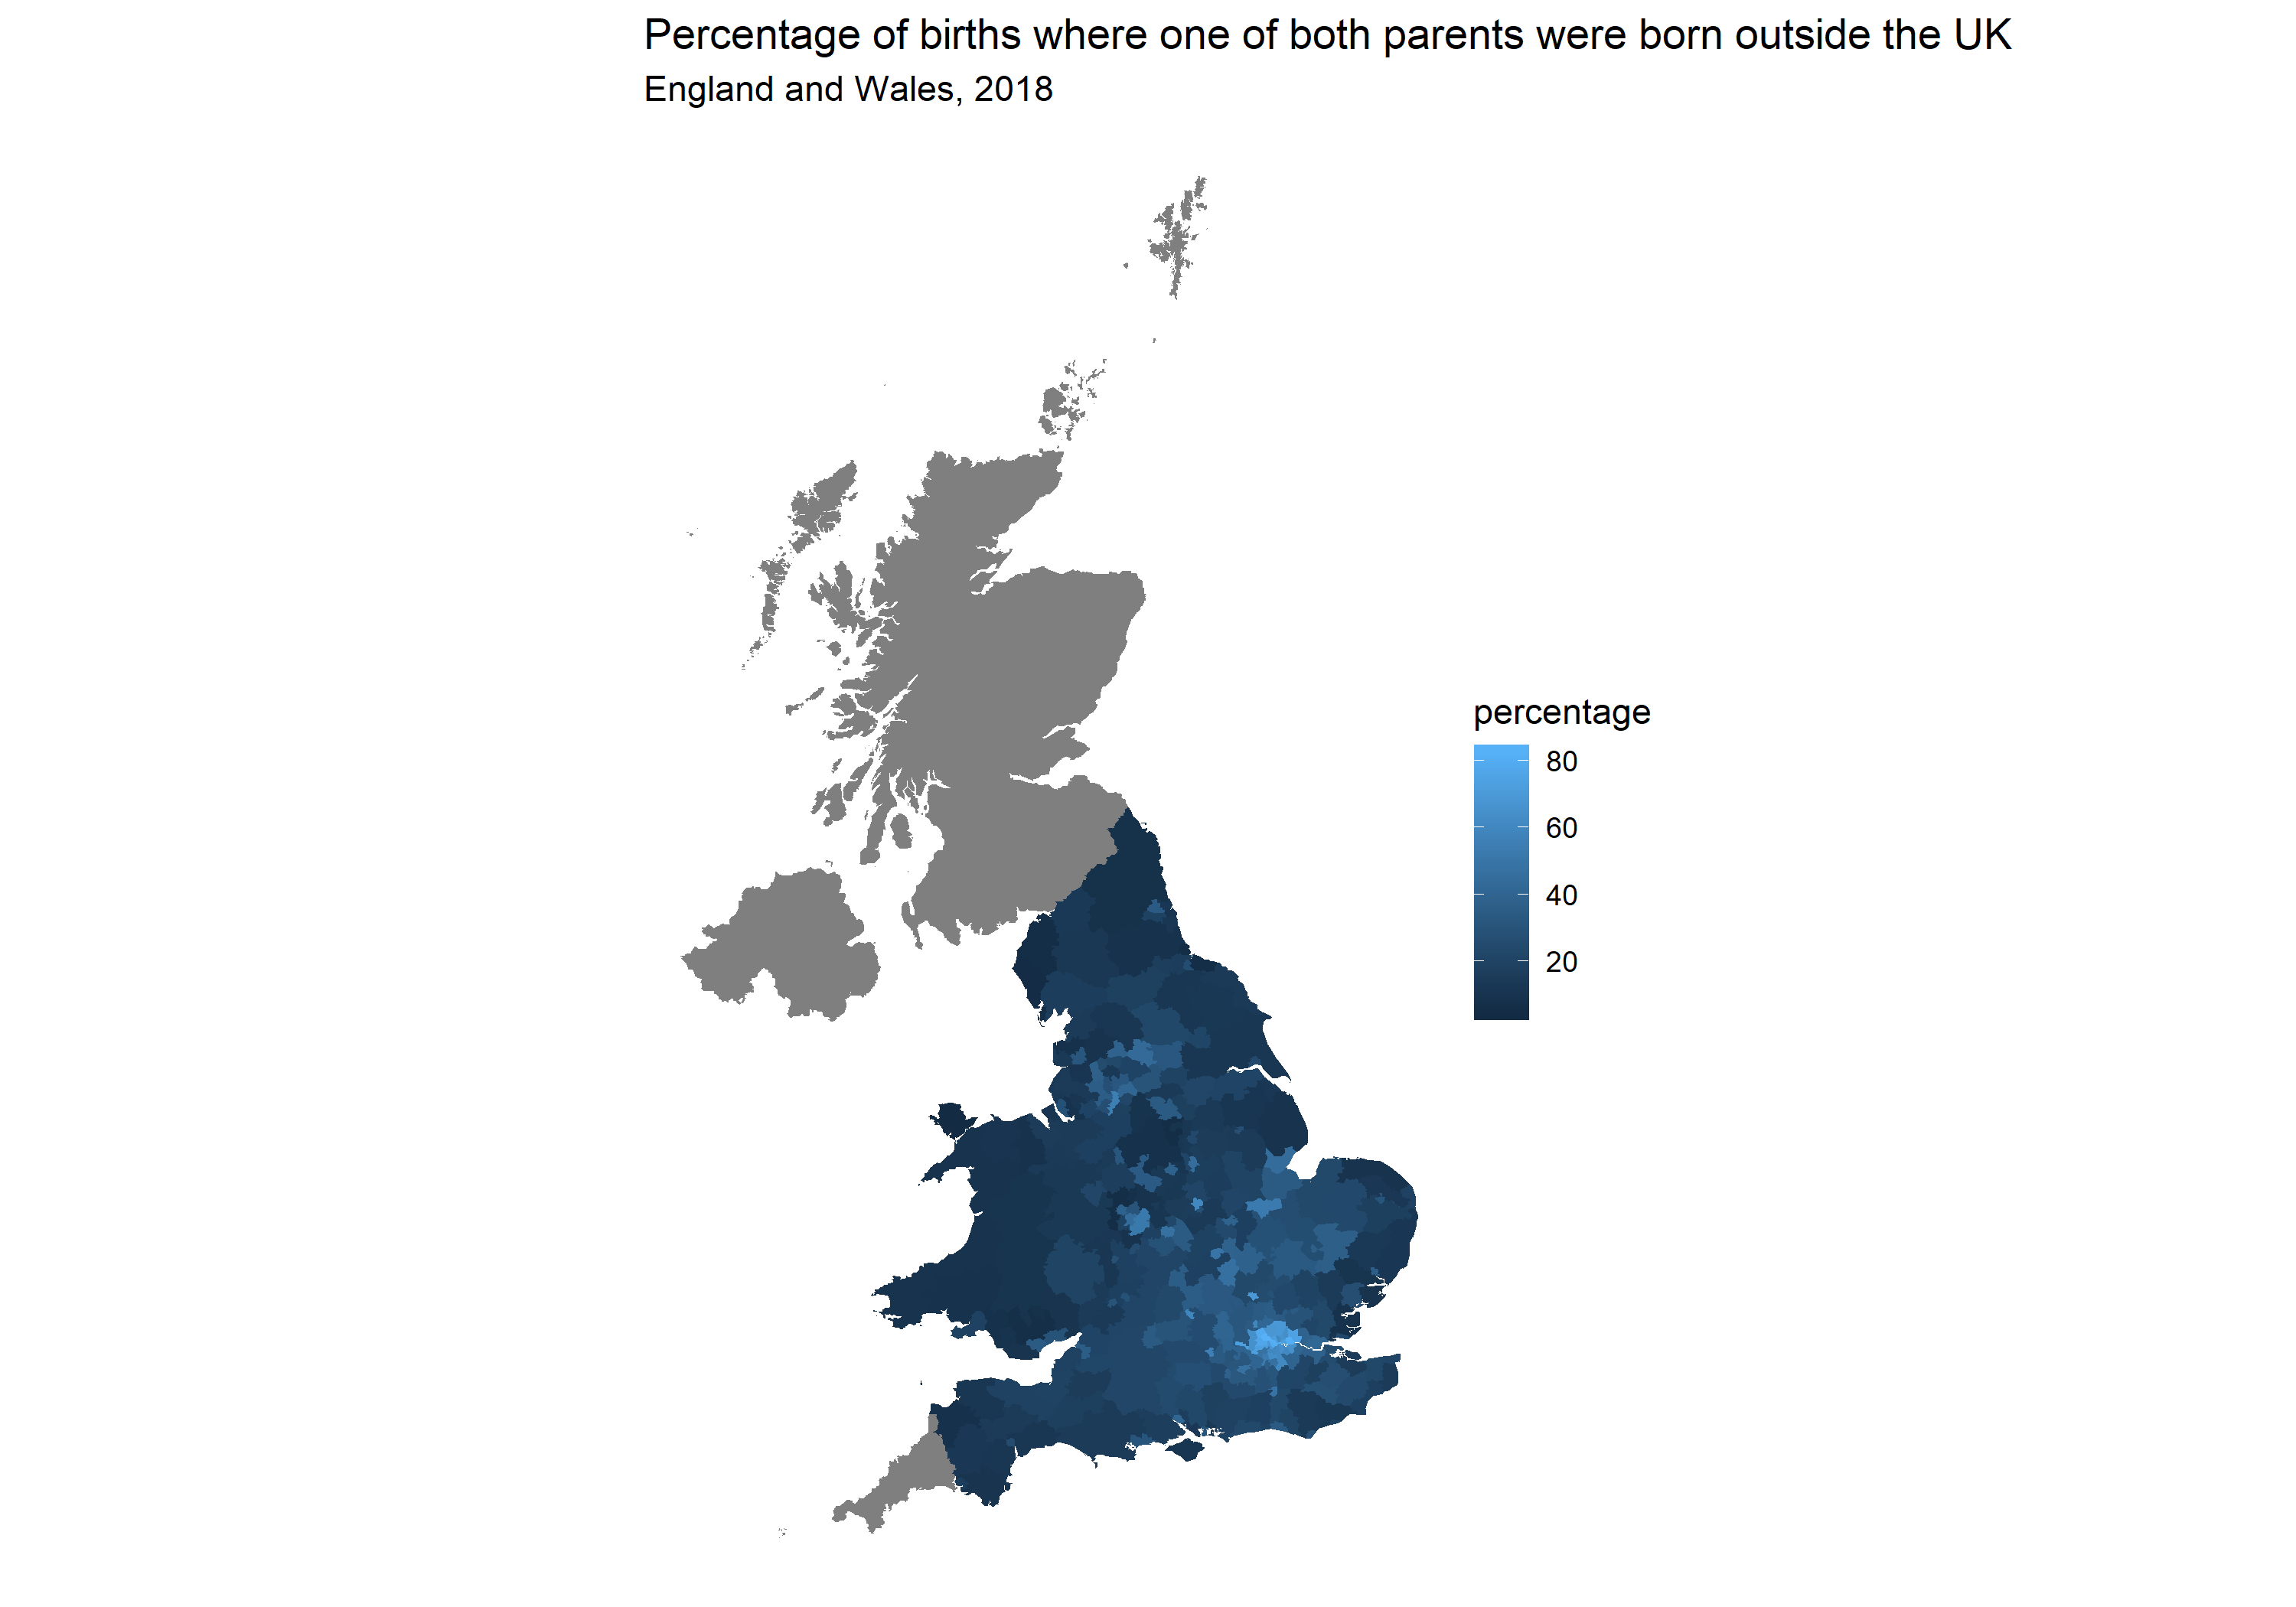 How to make a UK Local Authority choropleth map in R